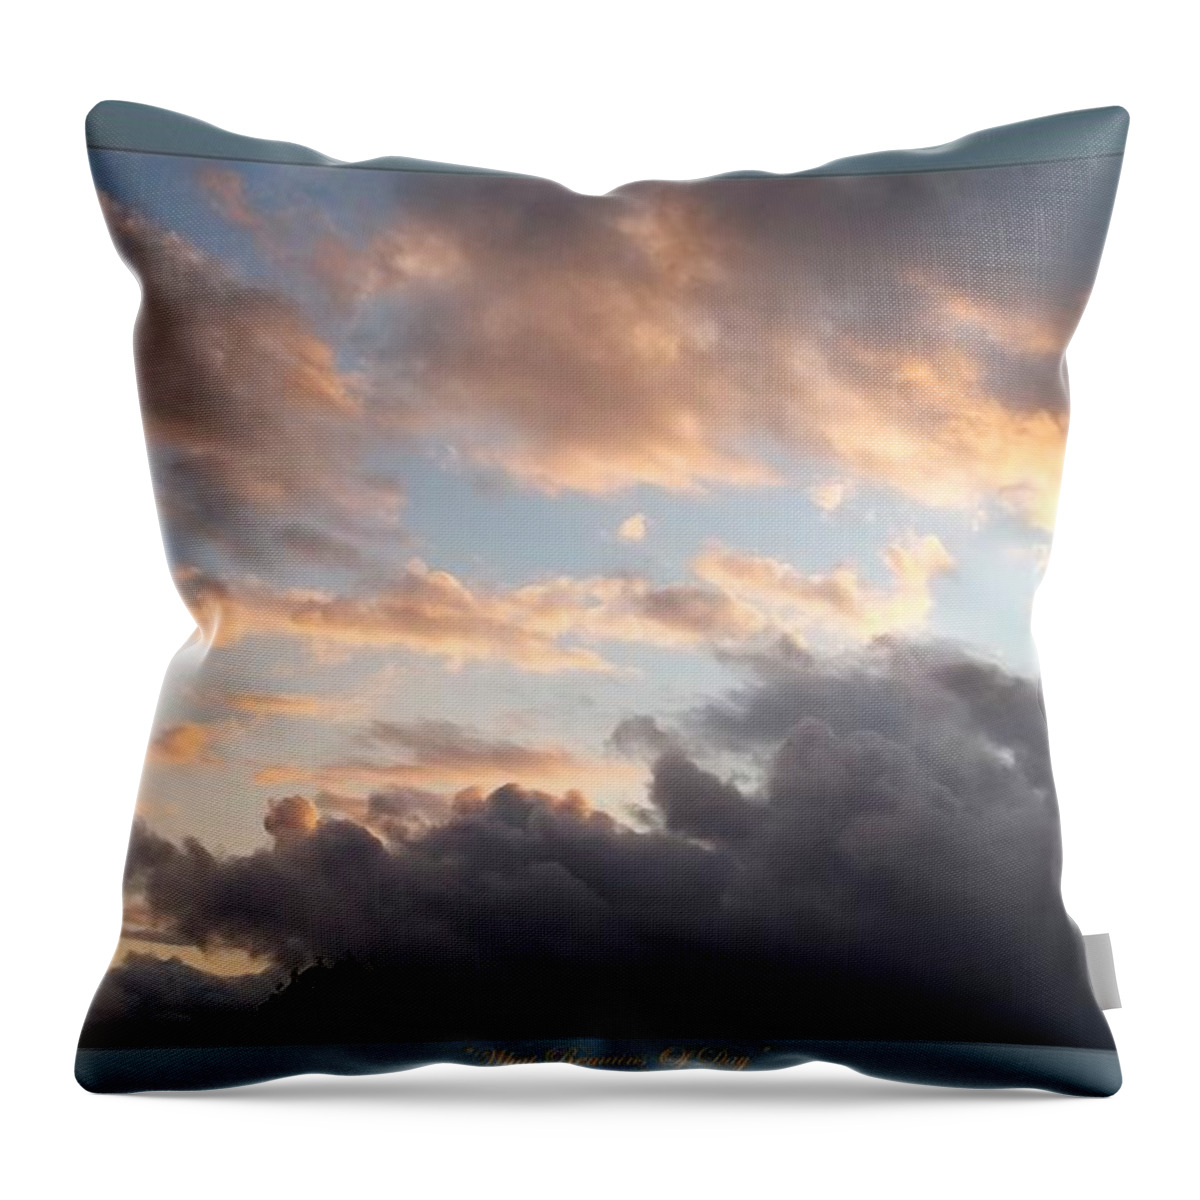 Glenn Mccarthy Art Throw Pillow featuring the photograph What Remains Of Day by Glenn McCarthy Art and Photography